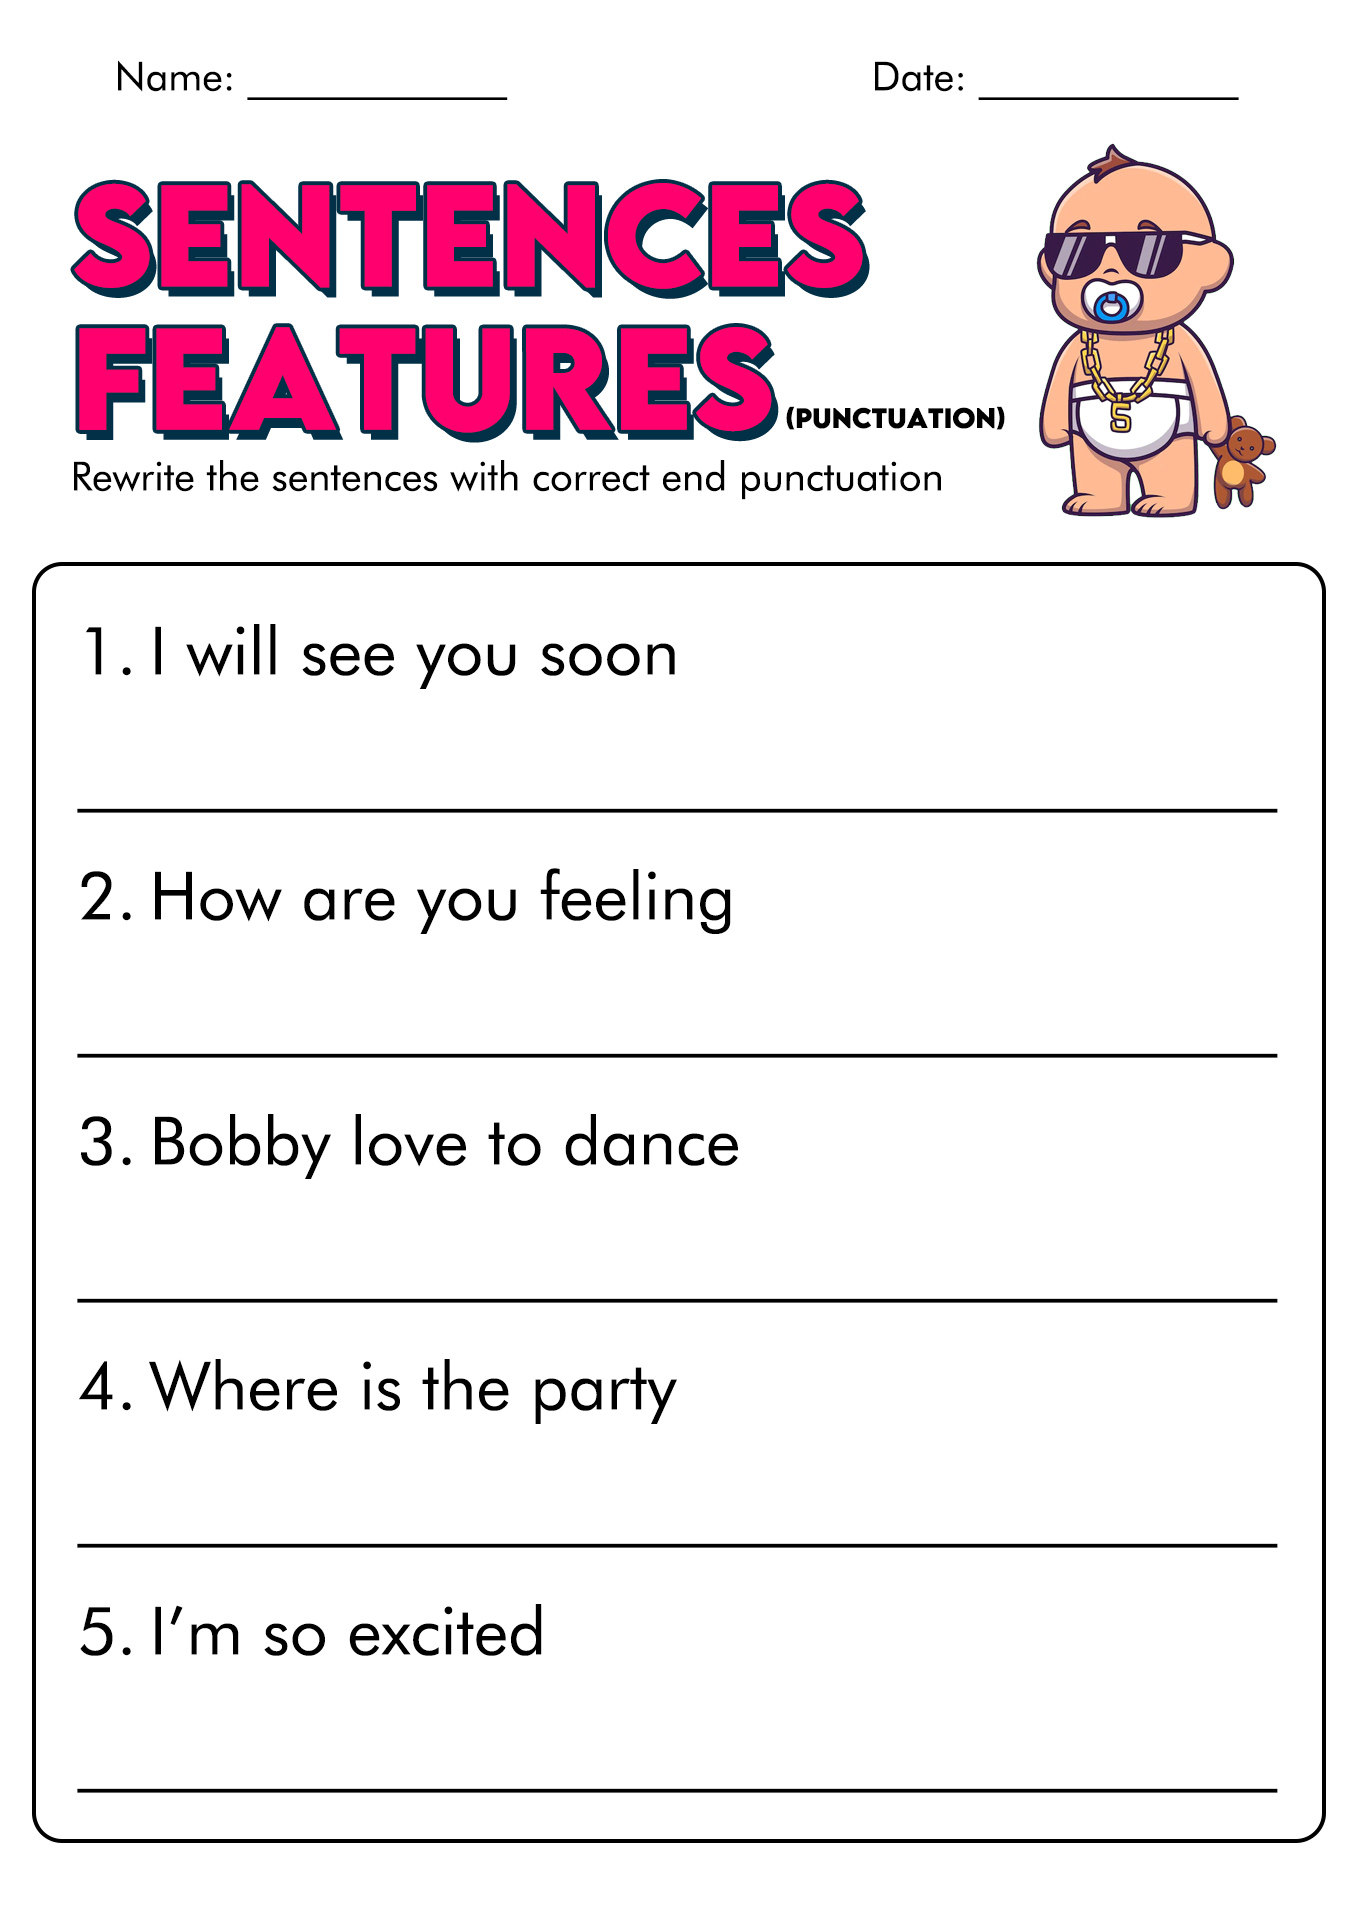 20-best-images-of-punctuation-worksheets-for-grade-5-5th-grade-b23